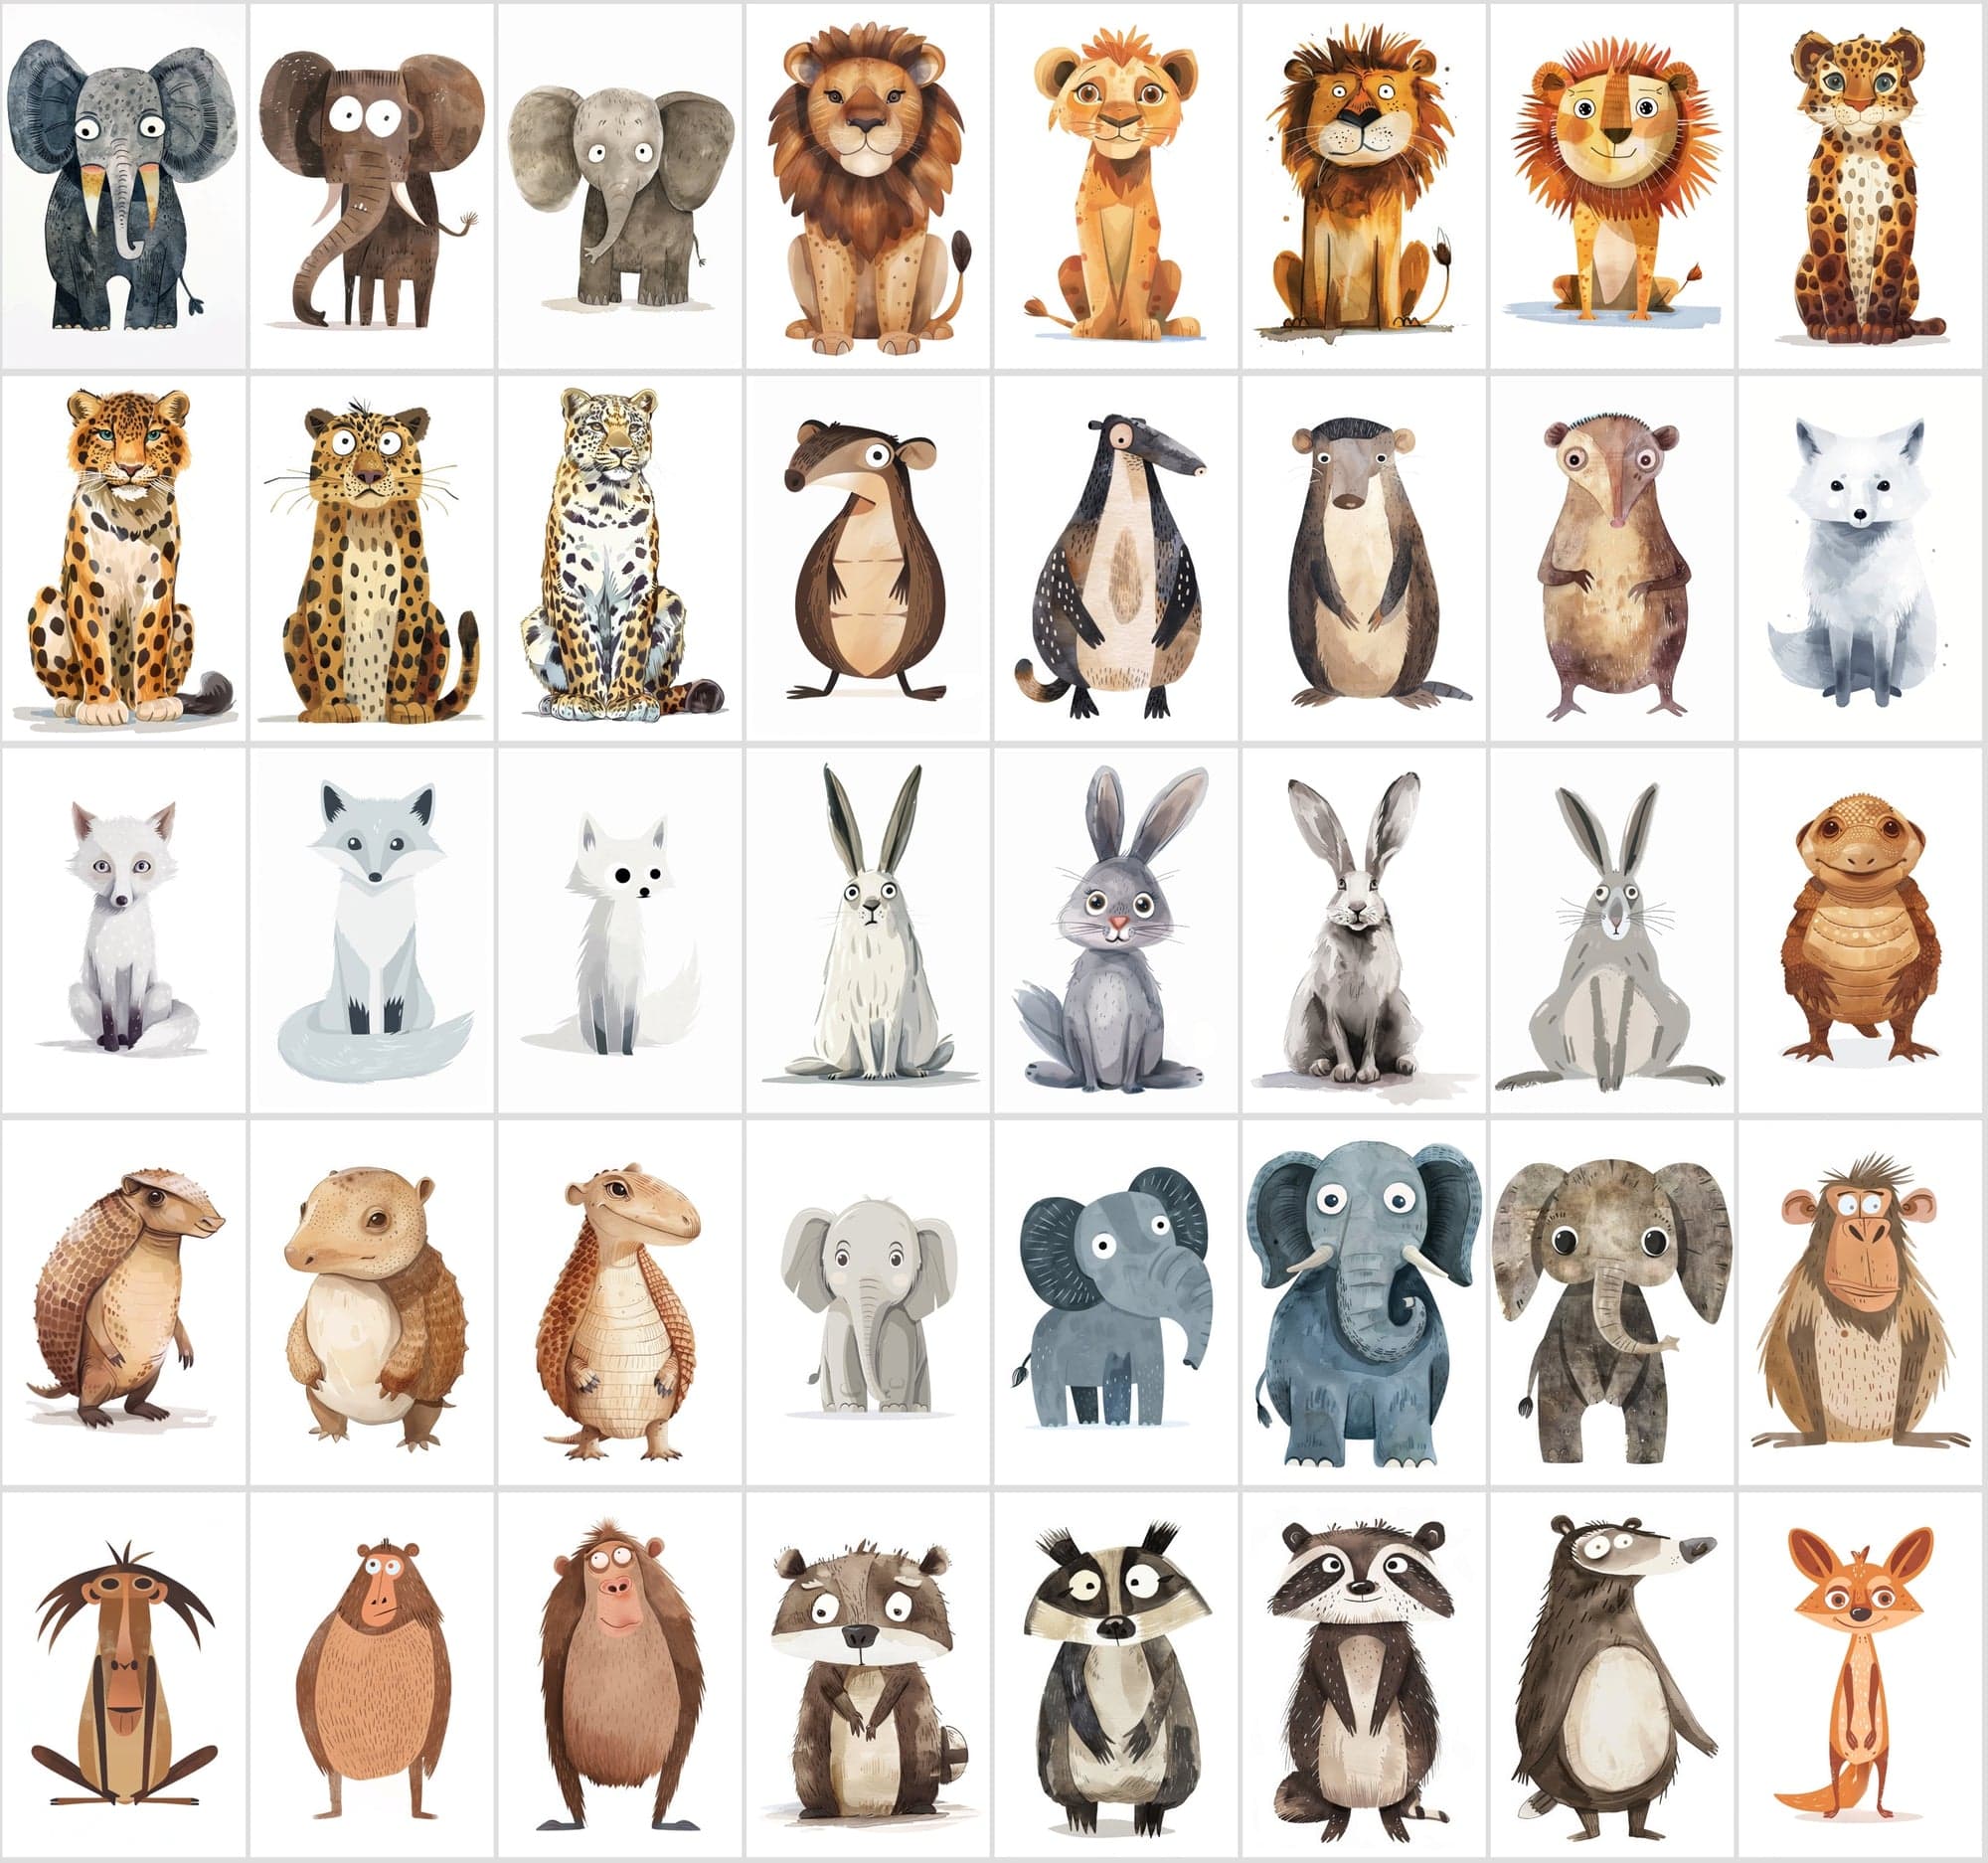 550 High-Resolution Funny Animal Illustrations - Vivid, Whimsical Art with Commercial Rights Digital Download Sumobundle